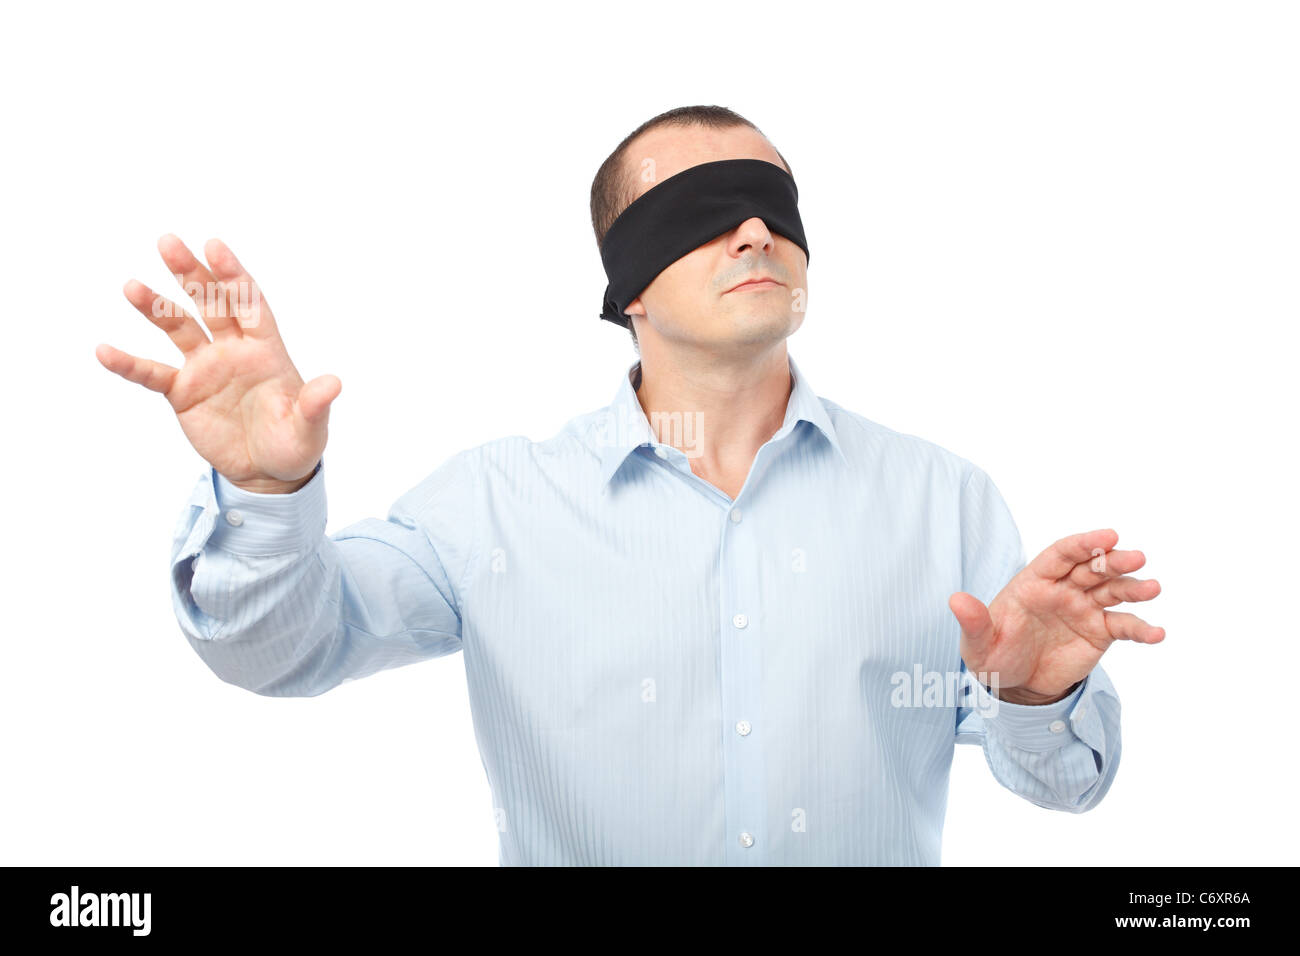 businessman-blindfolded-stretching-his-a